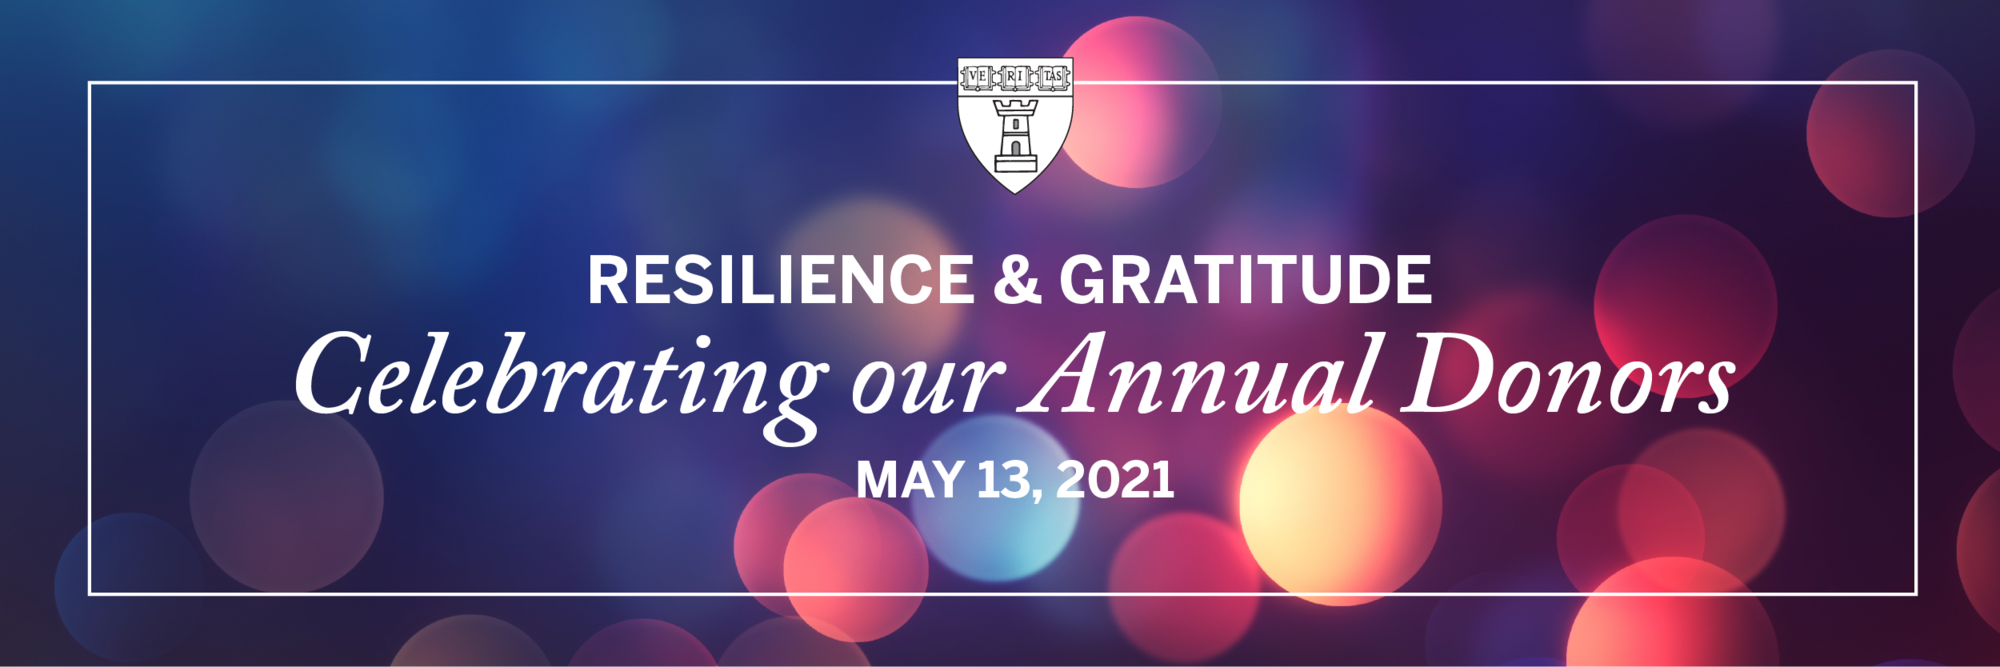 Resilience & Gratitudue: Celebrating Our Annual Donors